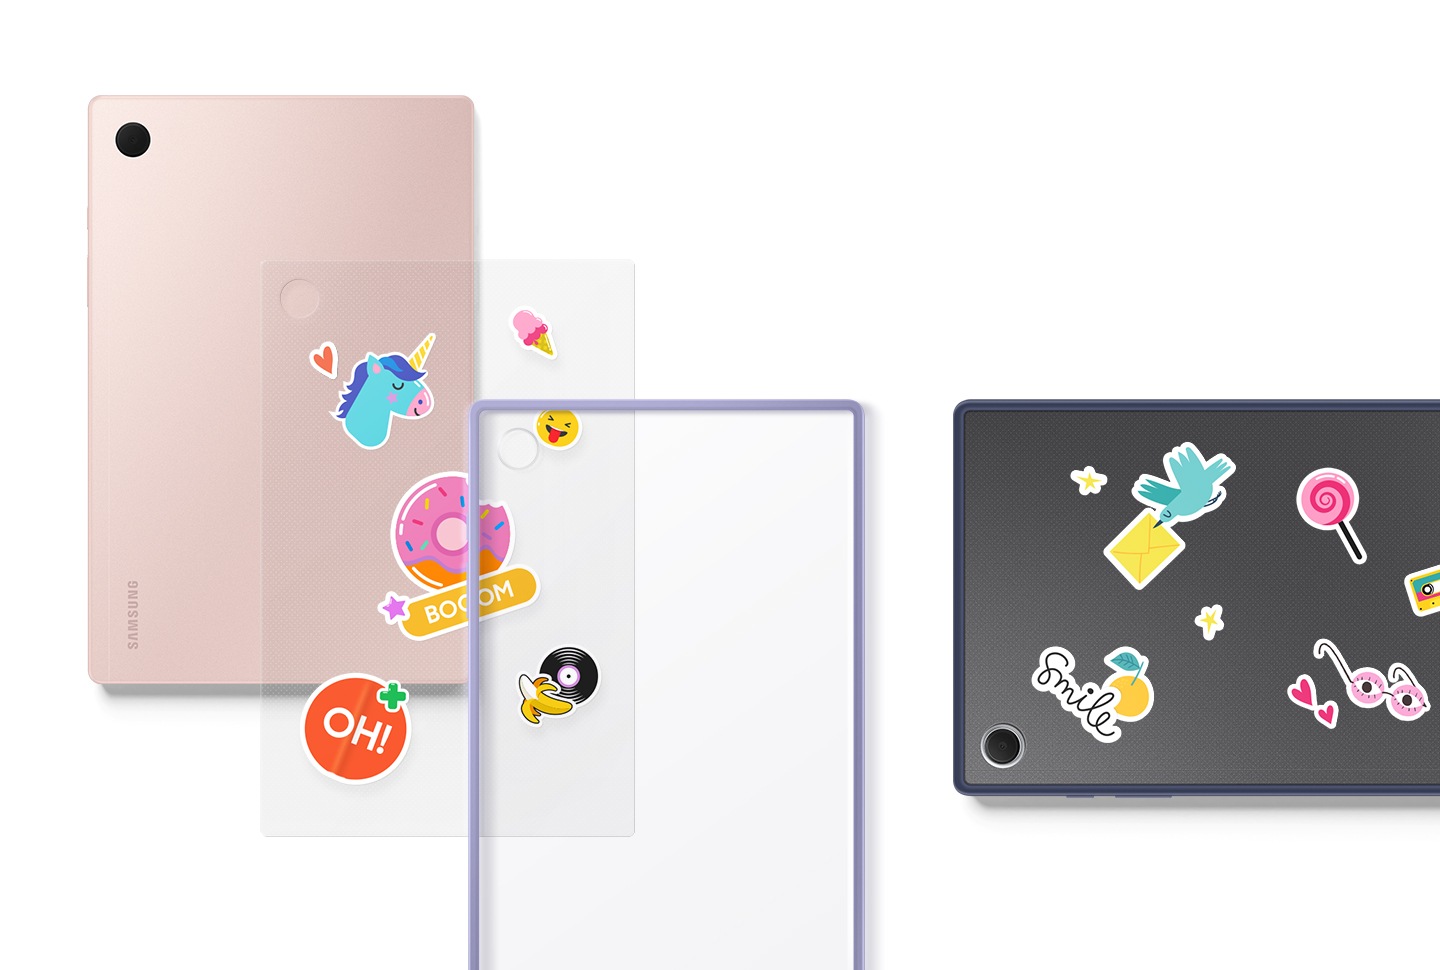 On the left, there is a pink Galaxy Tab A8. Placed overtop is a clear film with several stickers, and a Clear Edge Cover. To the right is the back of a Galaxy Tab A8 with a Clear Edge Cover decorated by stickers.